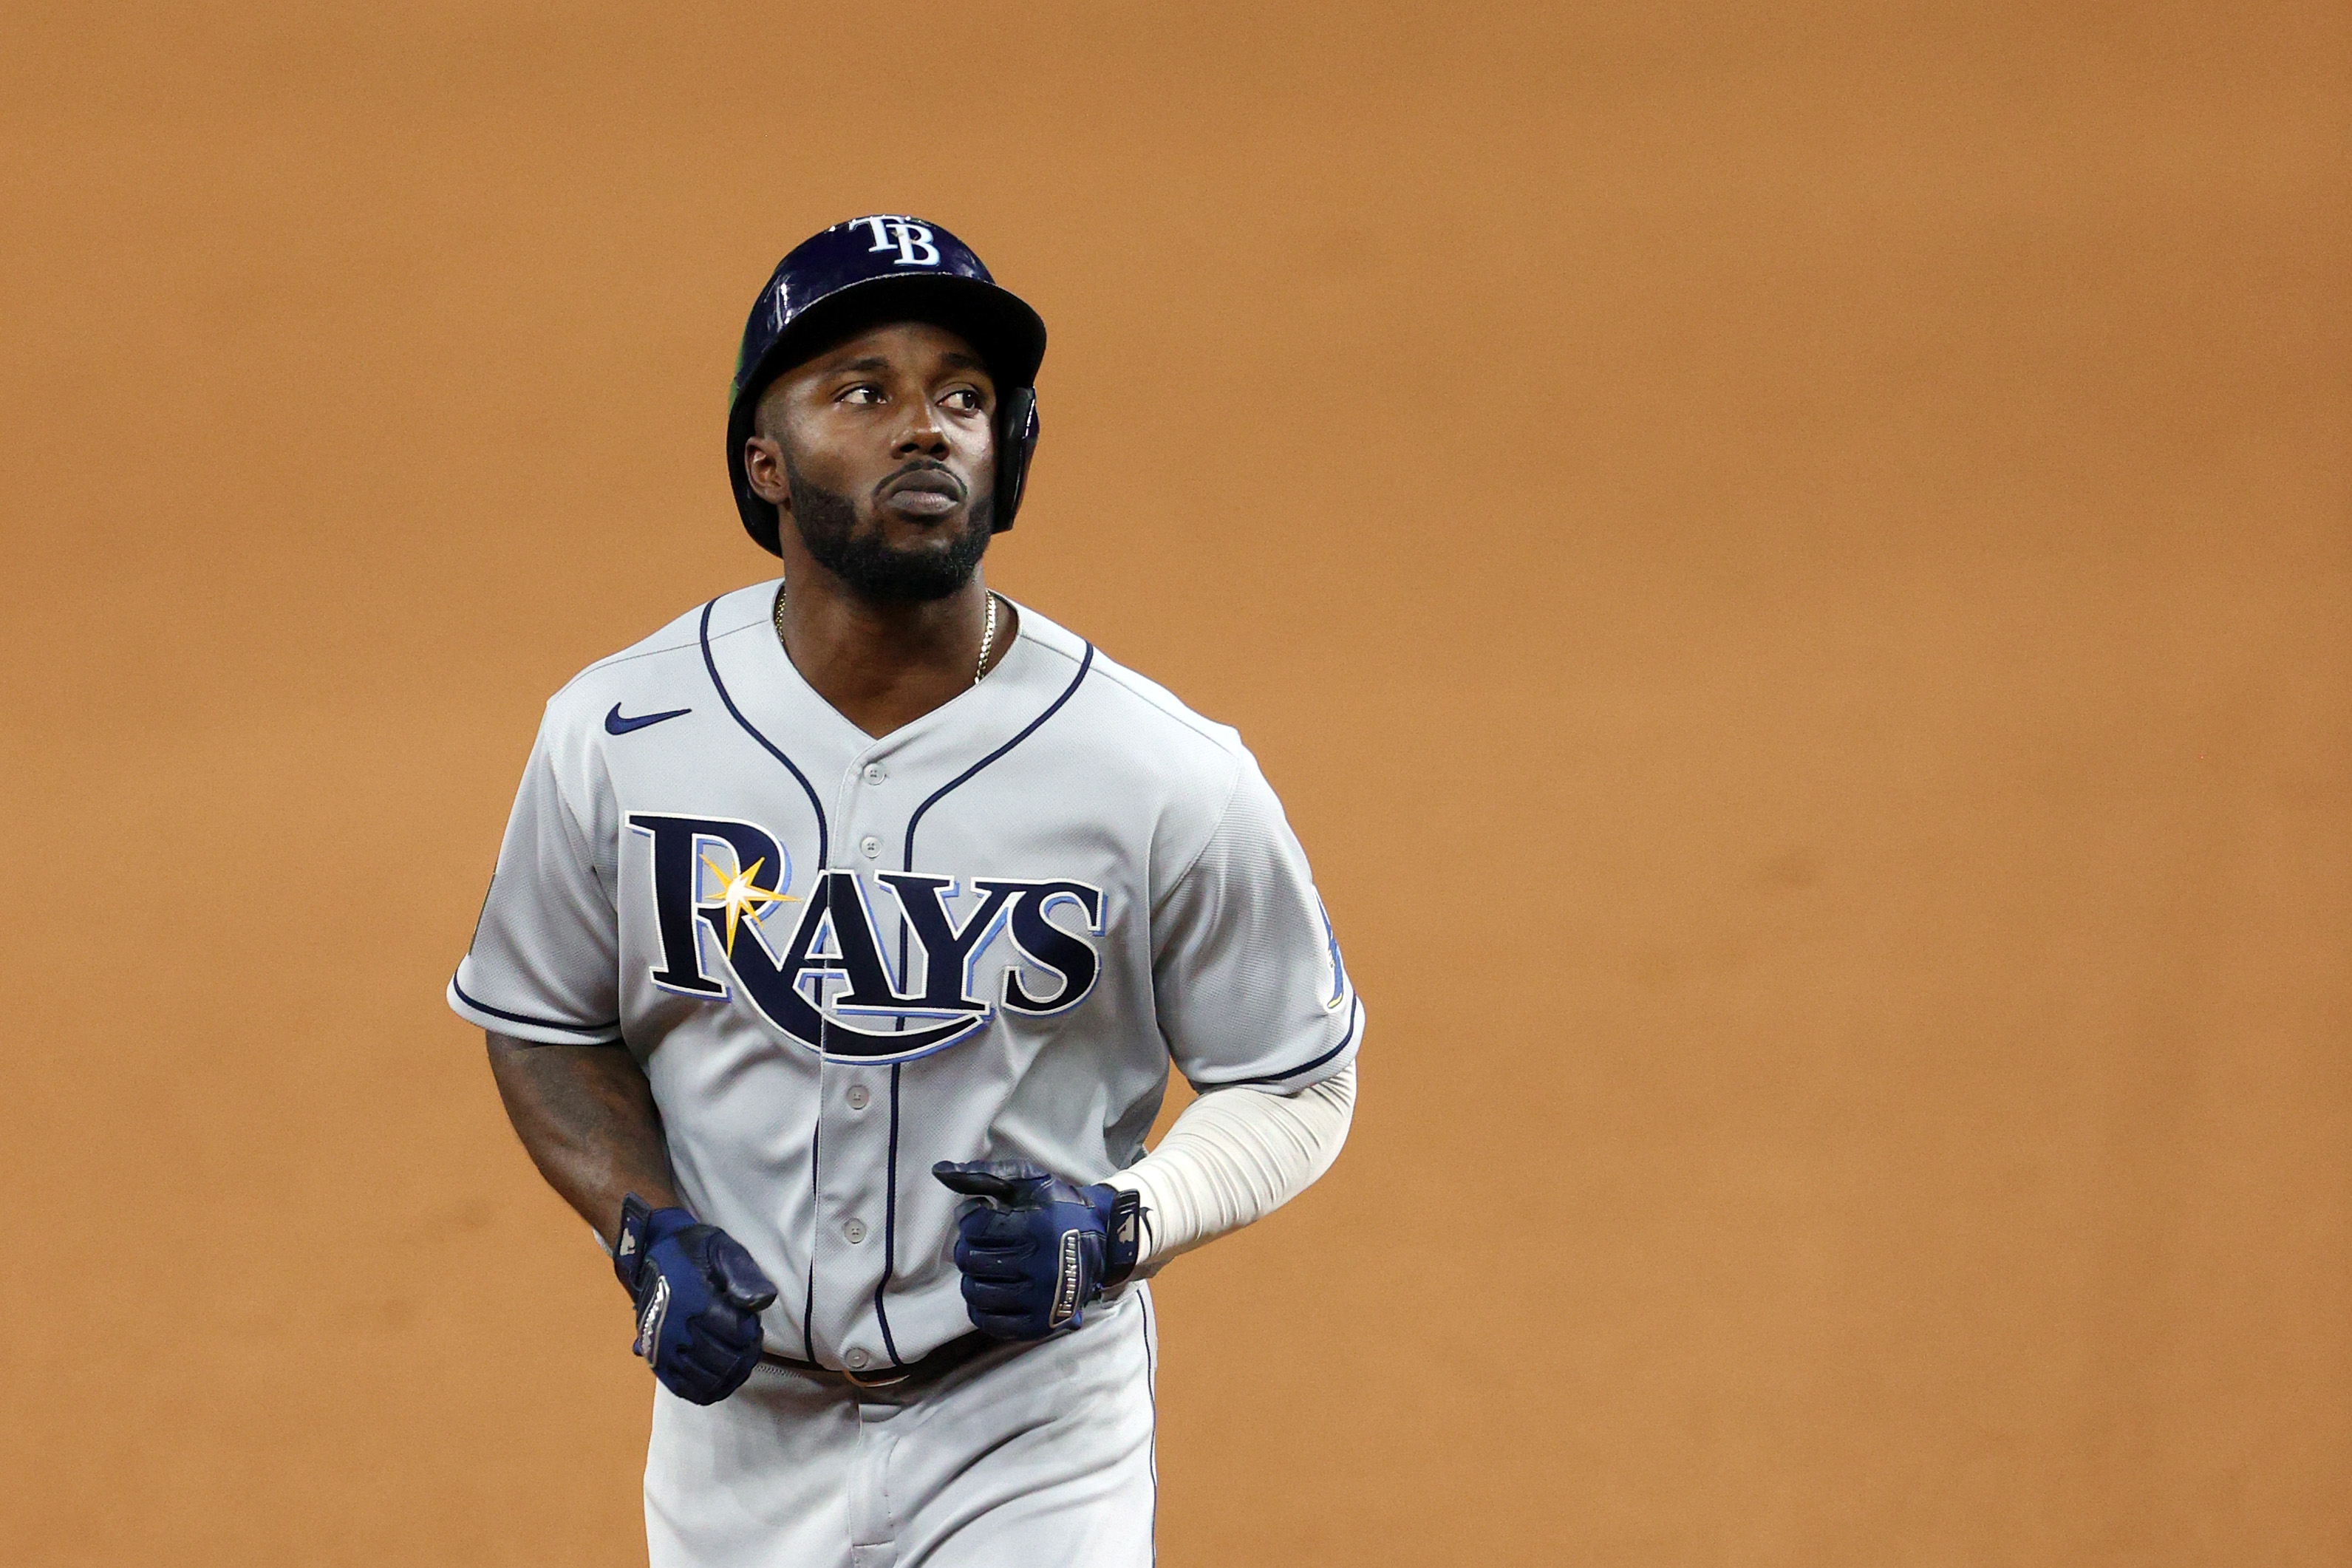 Rays star Randy Arozarena arrested in Mexico after 'violent